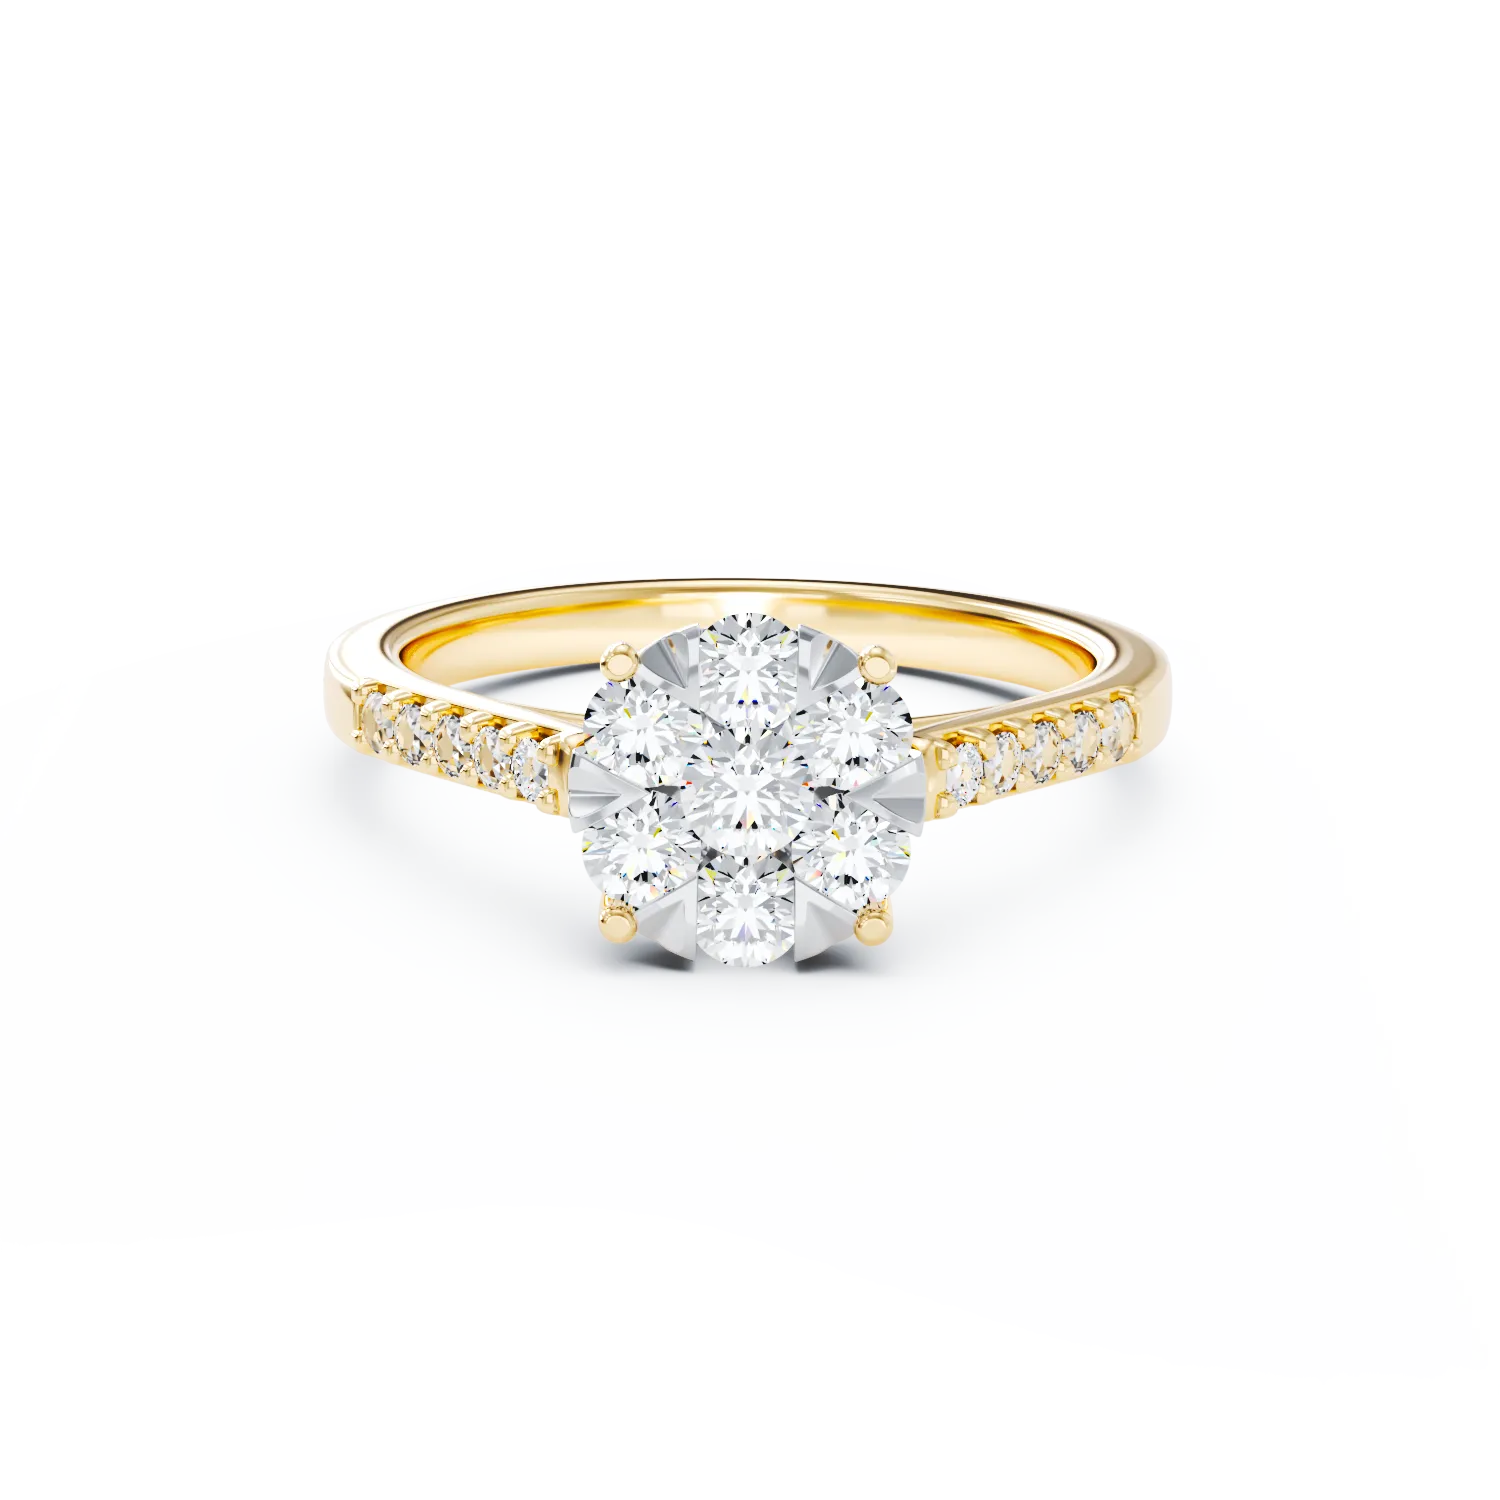 Yellow gold engagement ring with 0.5ct diamonds